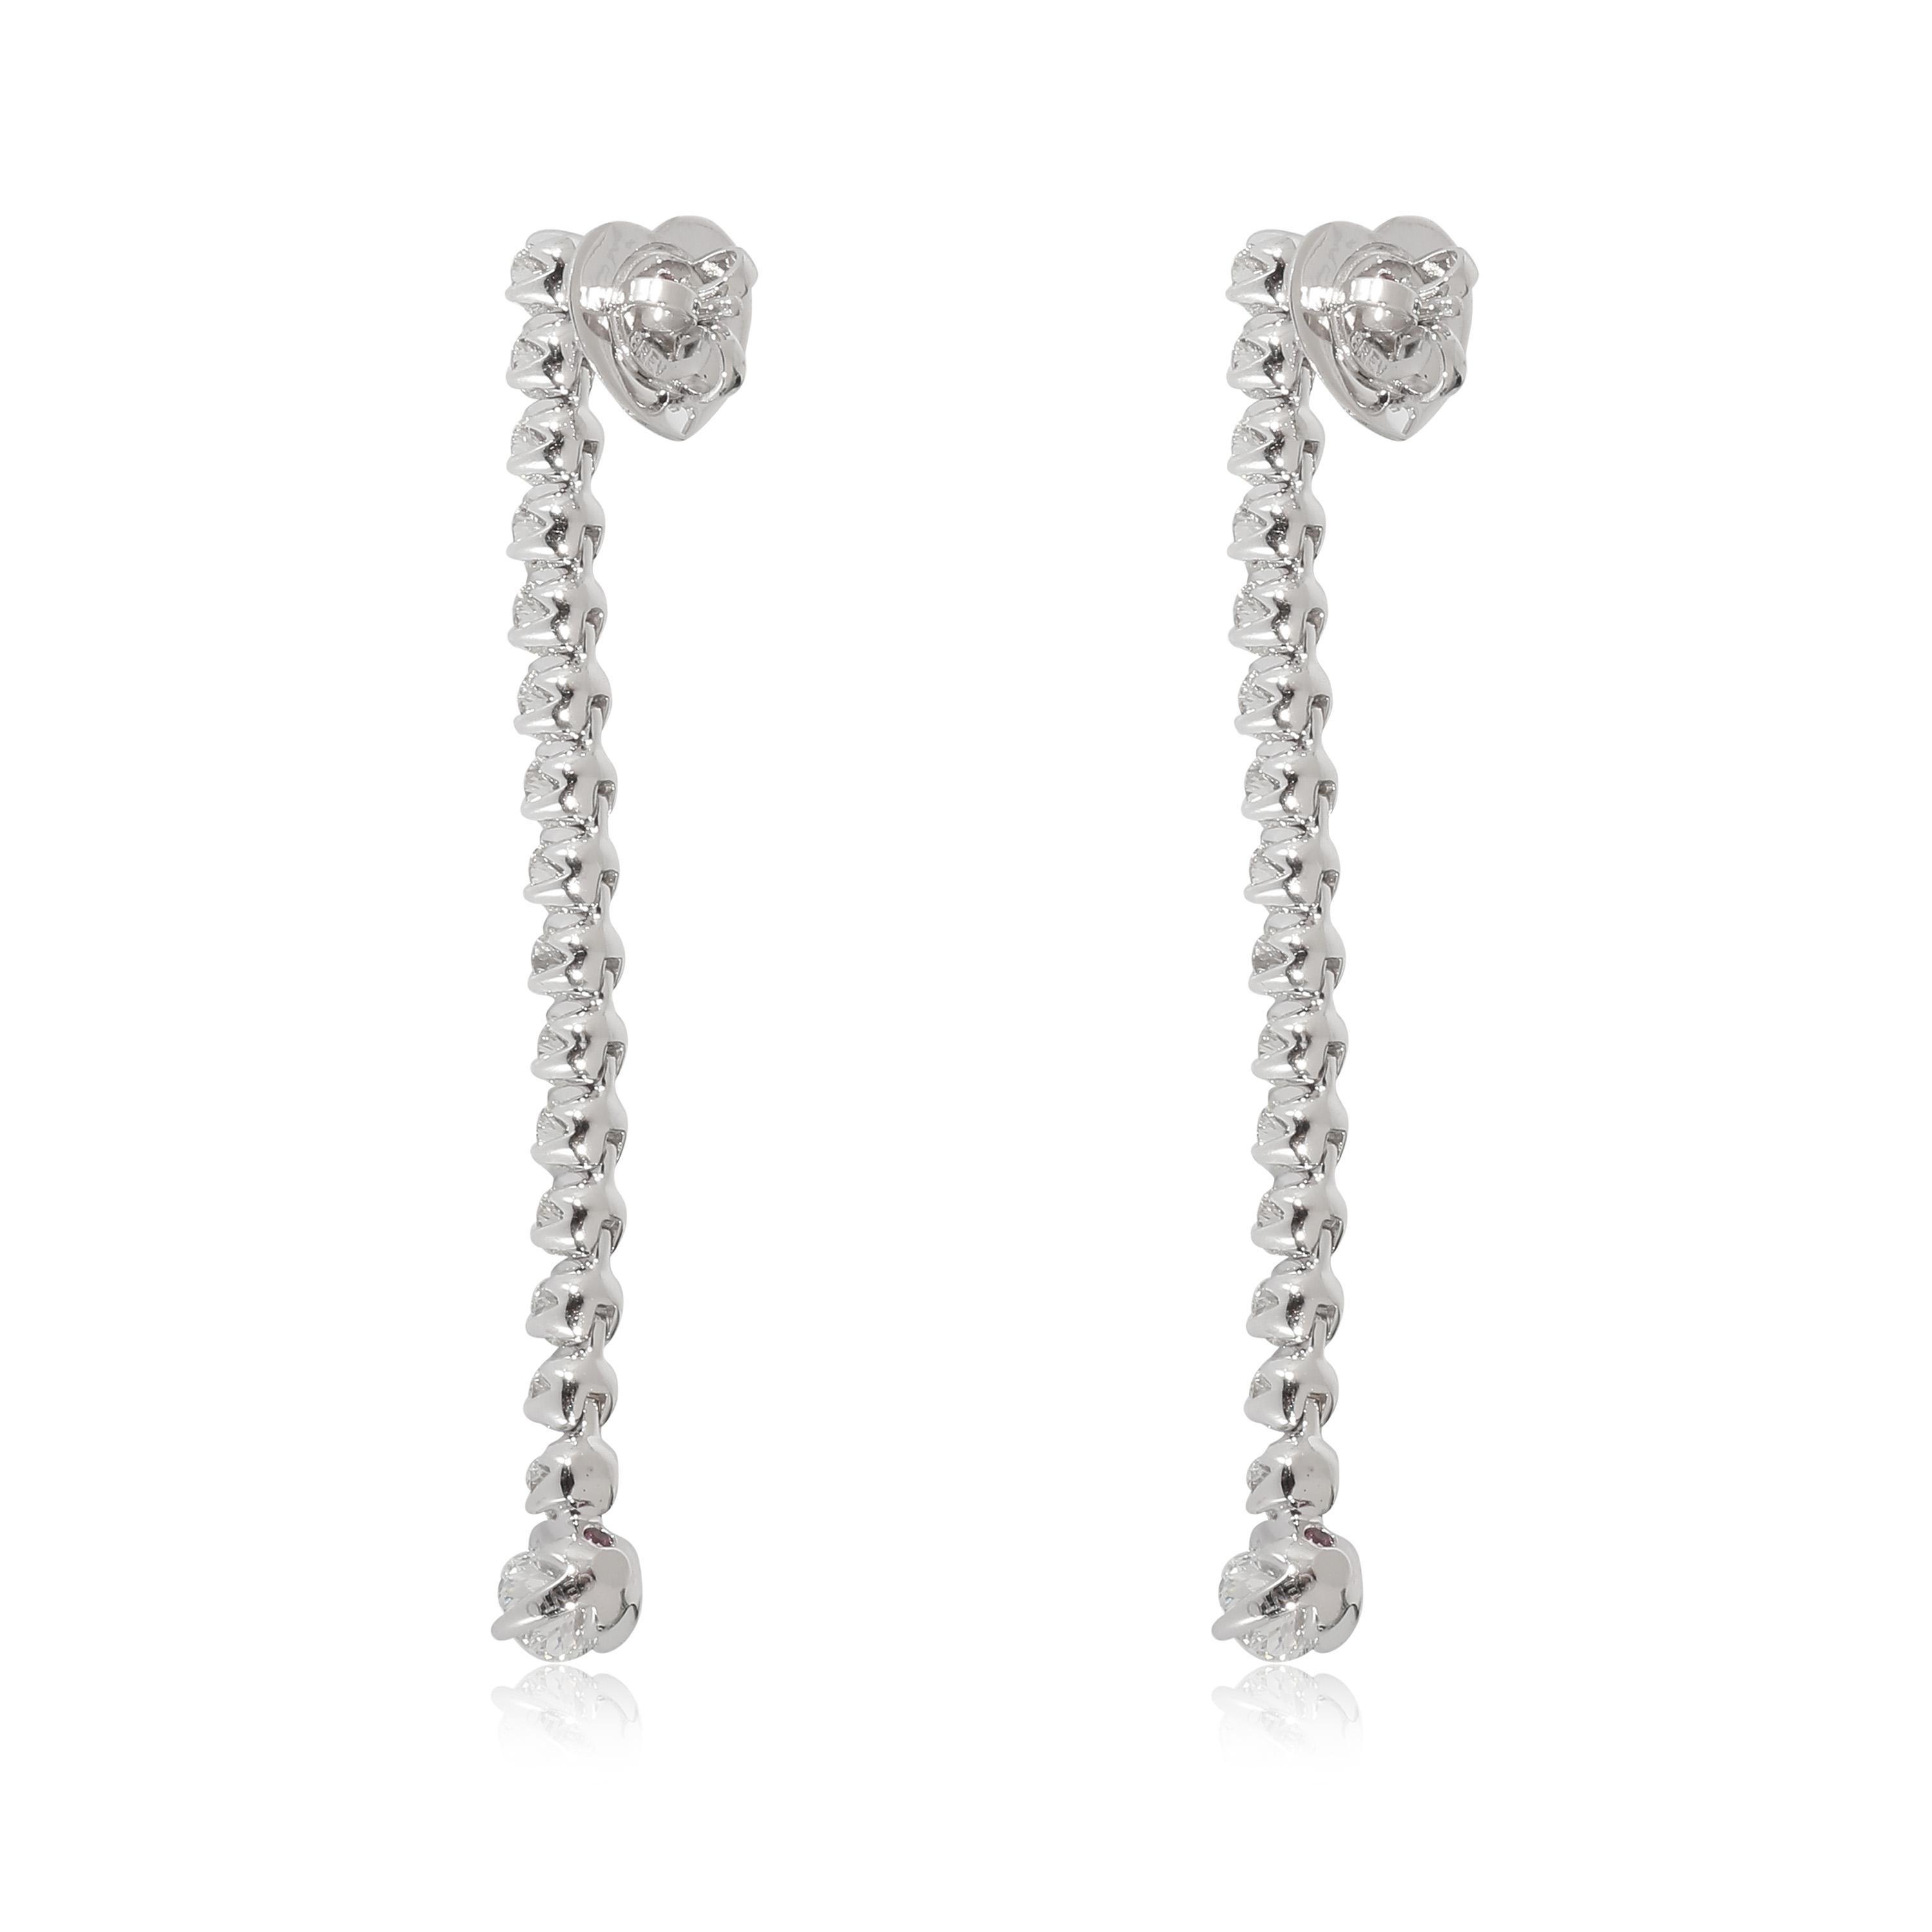 Roberto Coin Tulip Duster Drop Diamond Earrings in 18k White Gold 4.23 CTW

PRIMARY DETAILS
SKU: 132700
Listing Title: Roberto Coin Tulip Duster Drop Diamond Earrings in 18k White Gold 4.23 CTW
Condition Description: Retails for 22000 USD. In